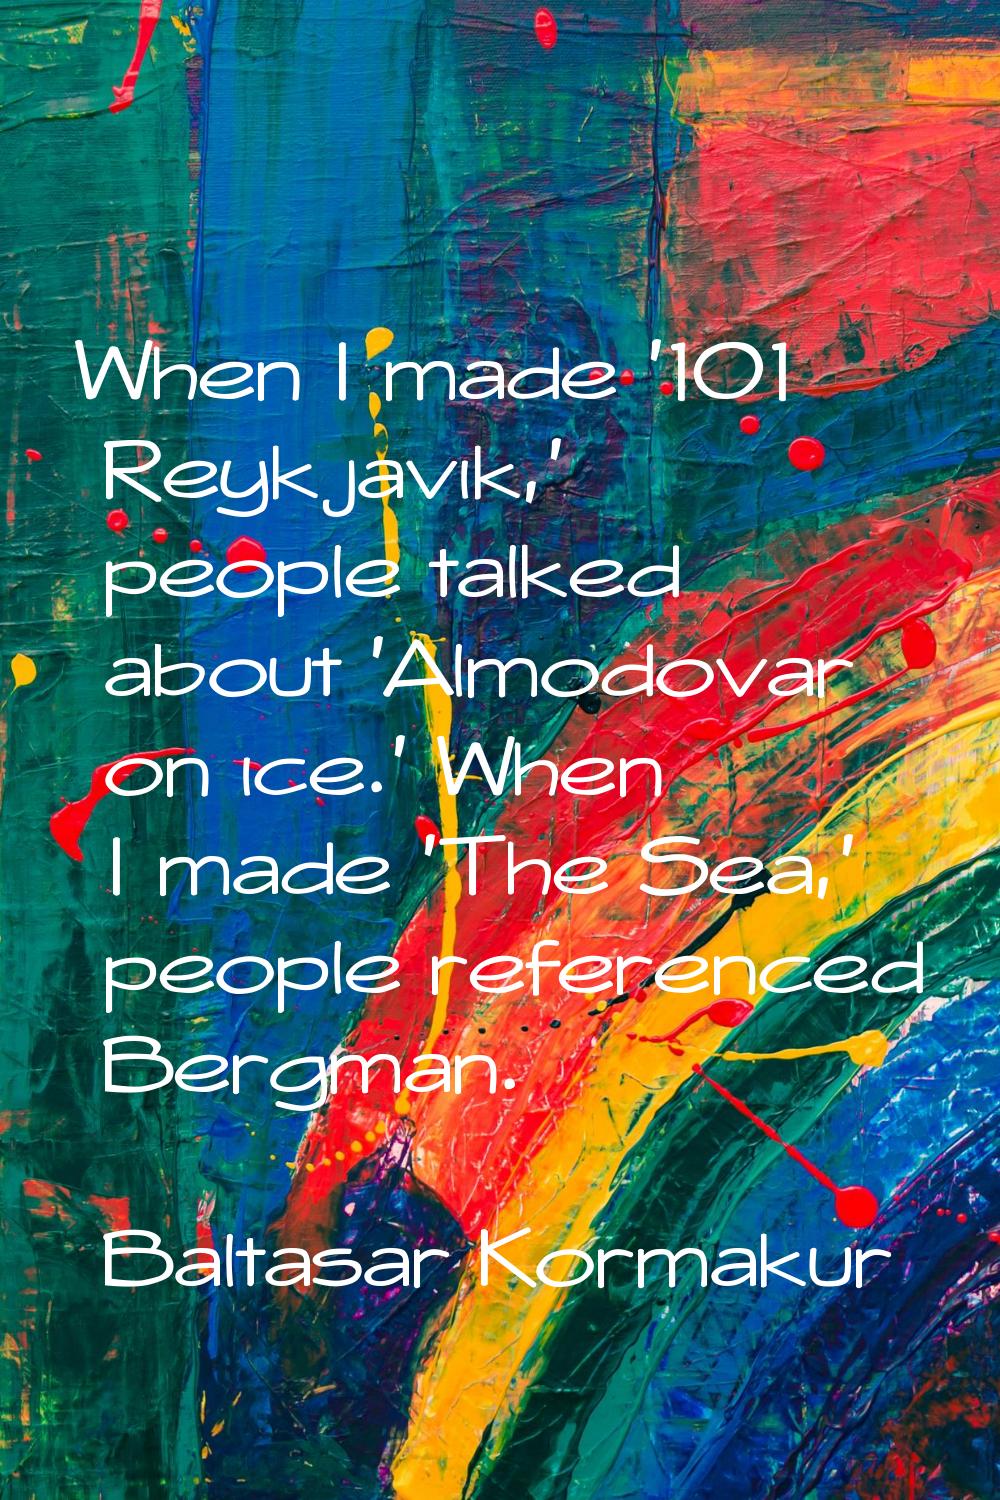 When I made '101 Reykjavik,' people talked about 'Almodovar on ice.' When I made 'The Sea,' people 